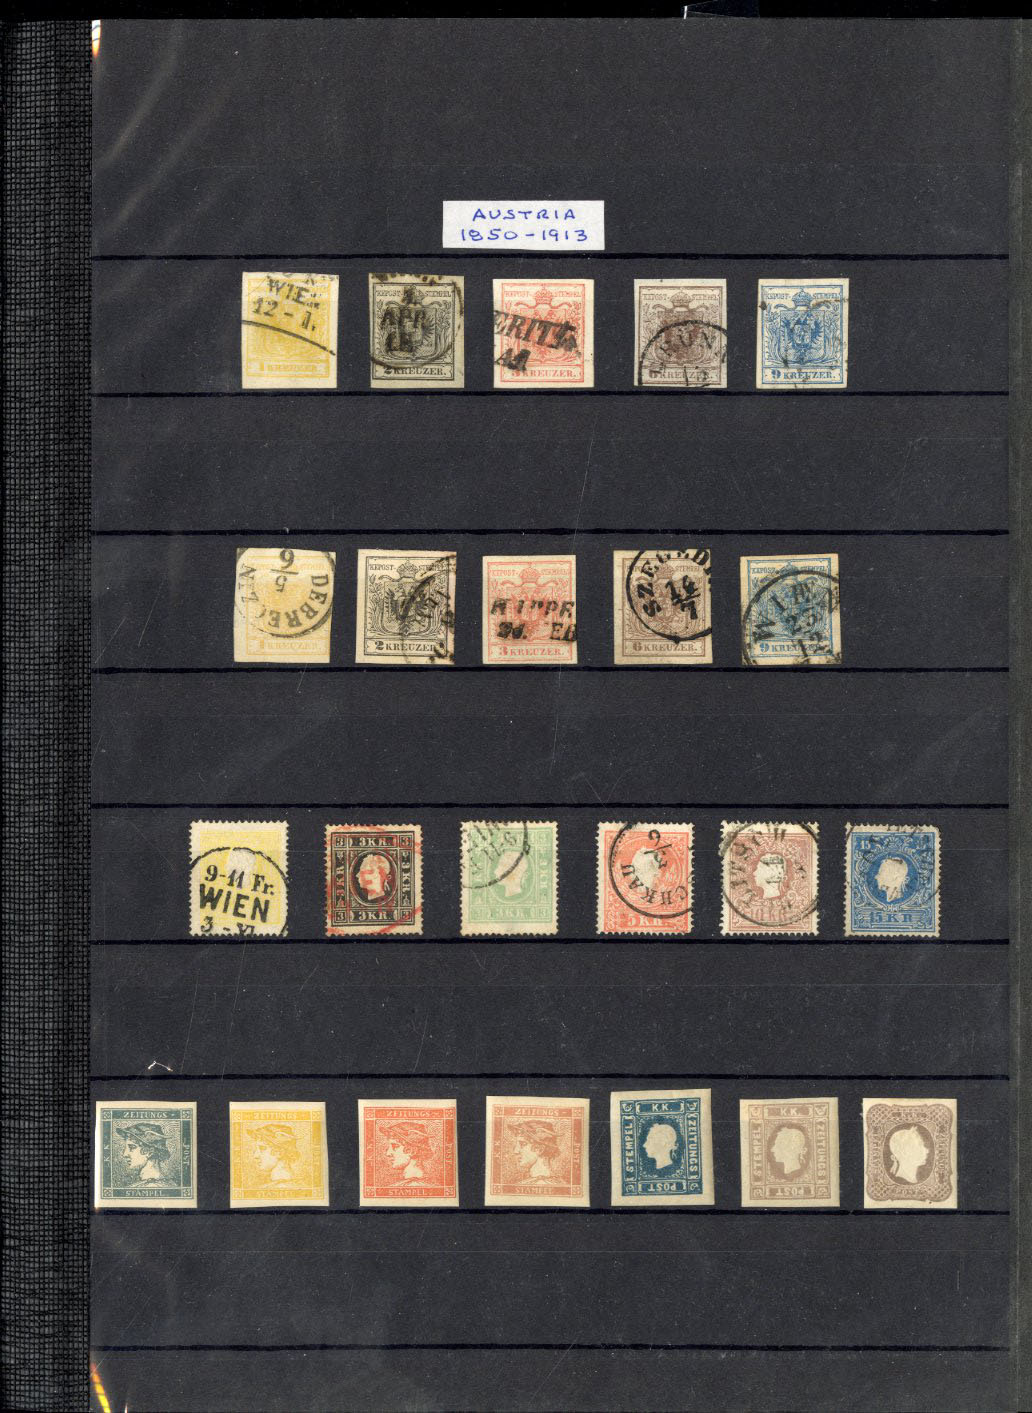 Lot 1407 - LARGE LOTS AND COLLECTIONS French Southern Antarctic Territories (TAAF)  -  Cherrystone Auctions U.S. & Worldwide Stamps & Postal History